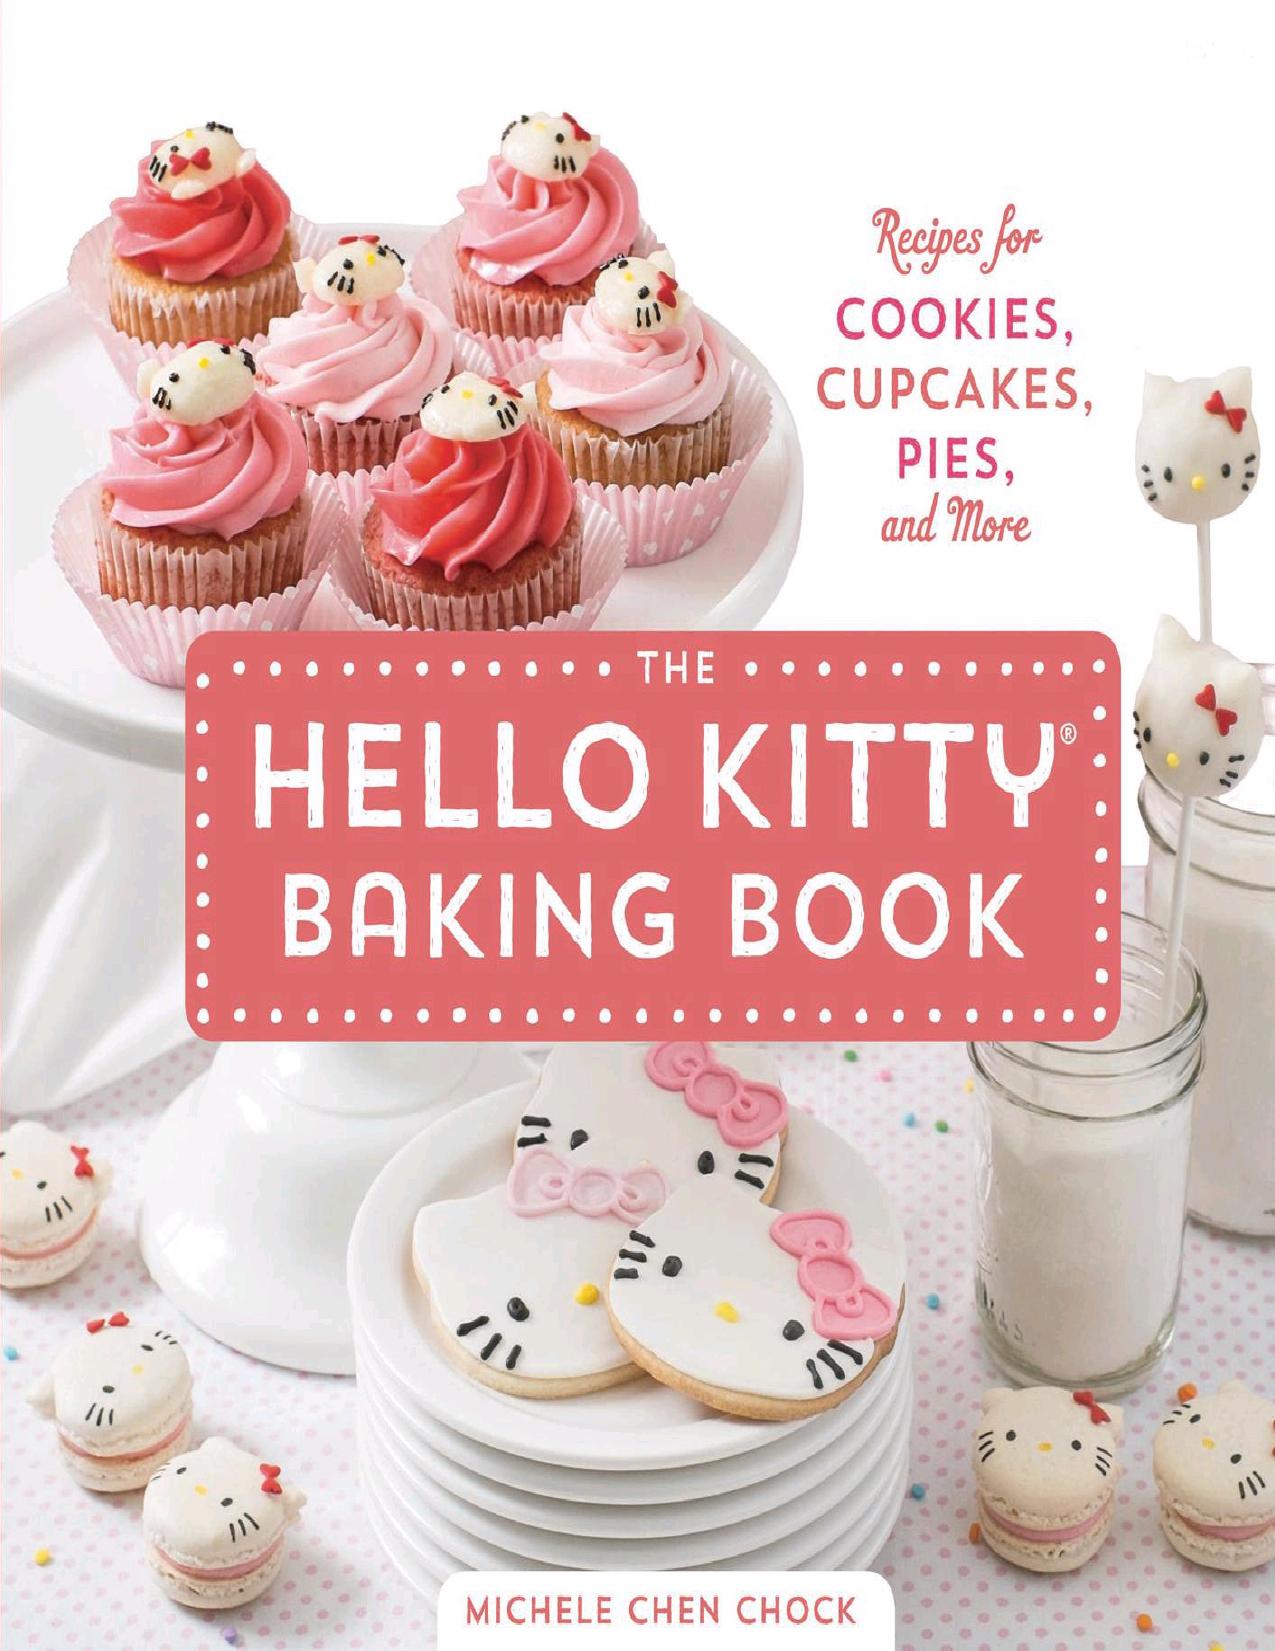 The Hello Kitty Baking Book by Michele Chen Chock